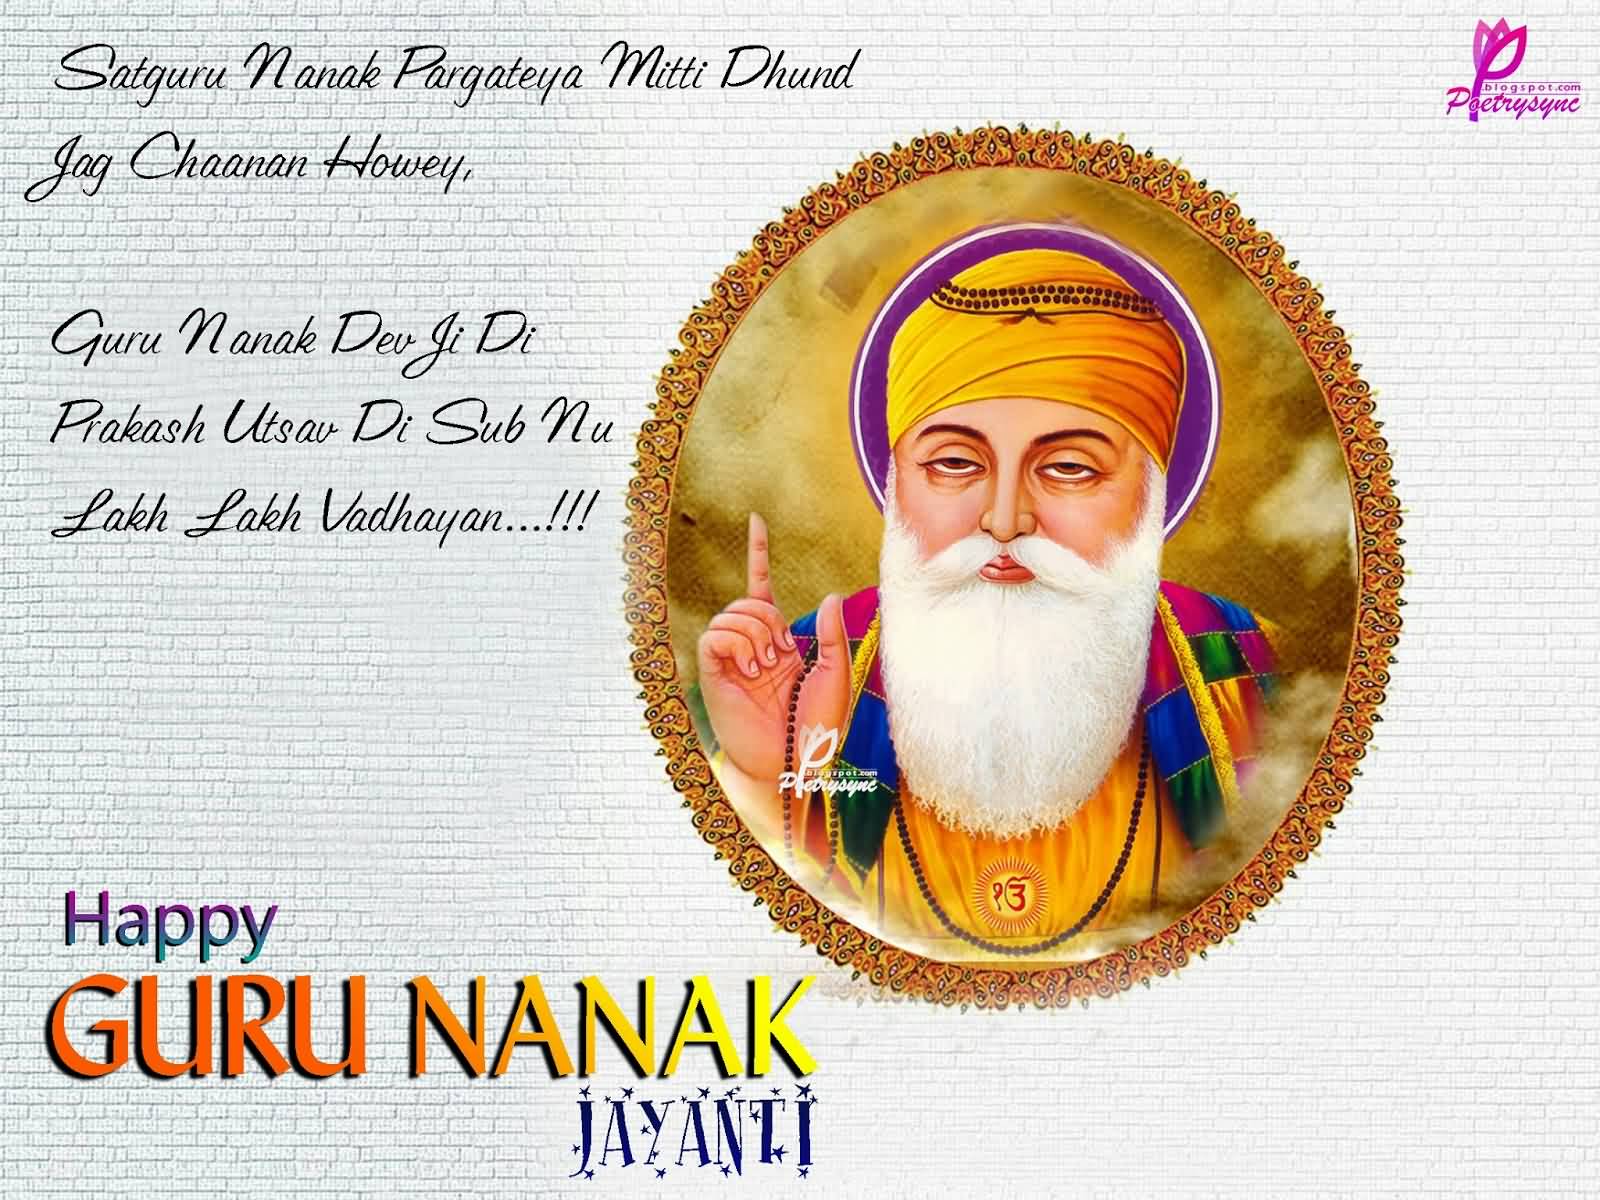 Best Pictures And Photos Of Guru Nanak Jayanti Wishes